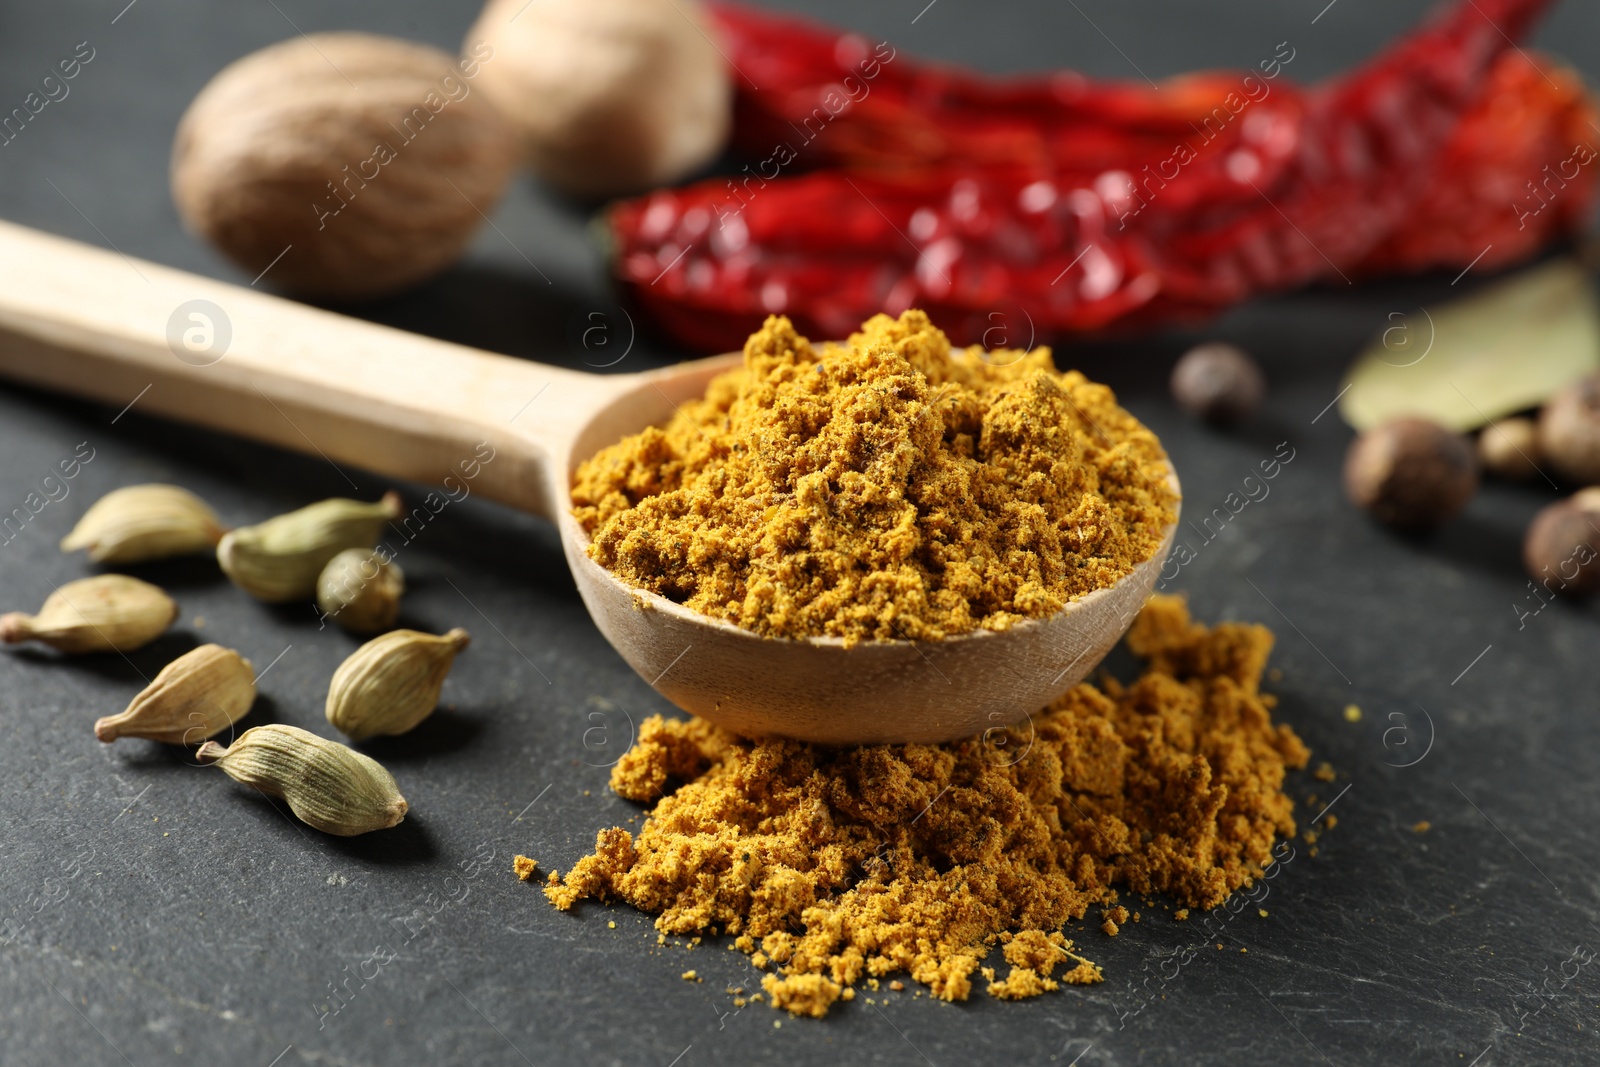 Photo of Spoon with dry curry powder and other spices on dark textured table, closeup